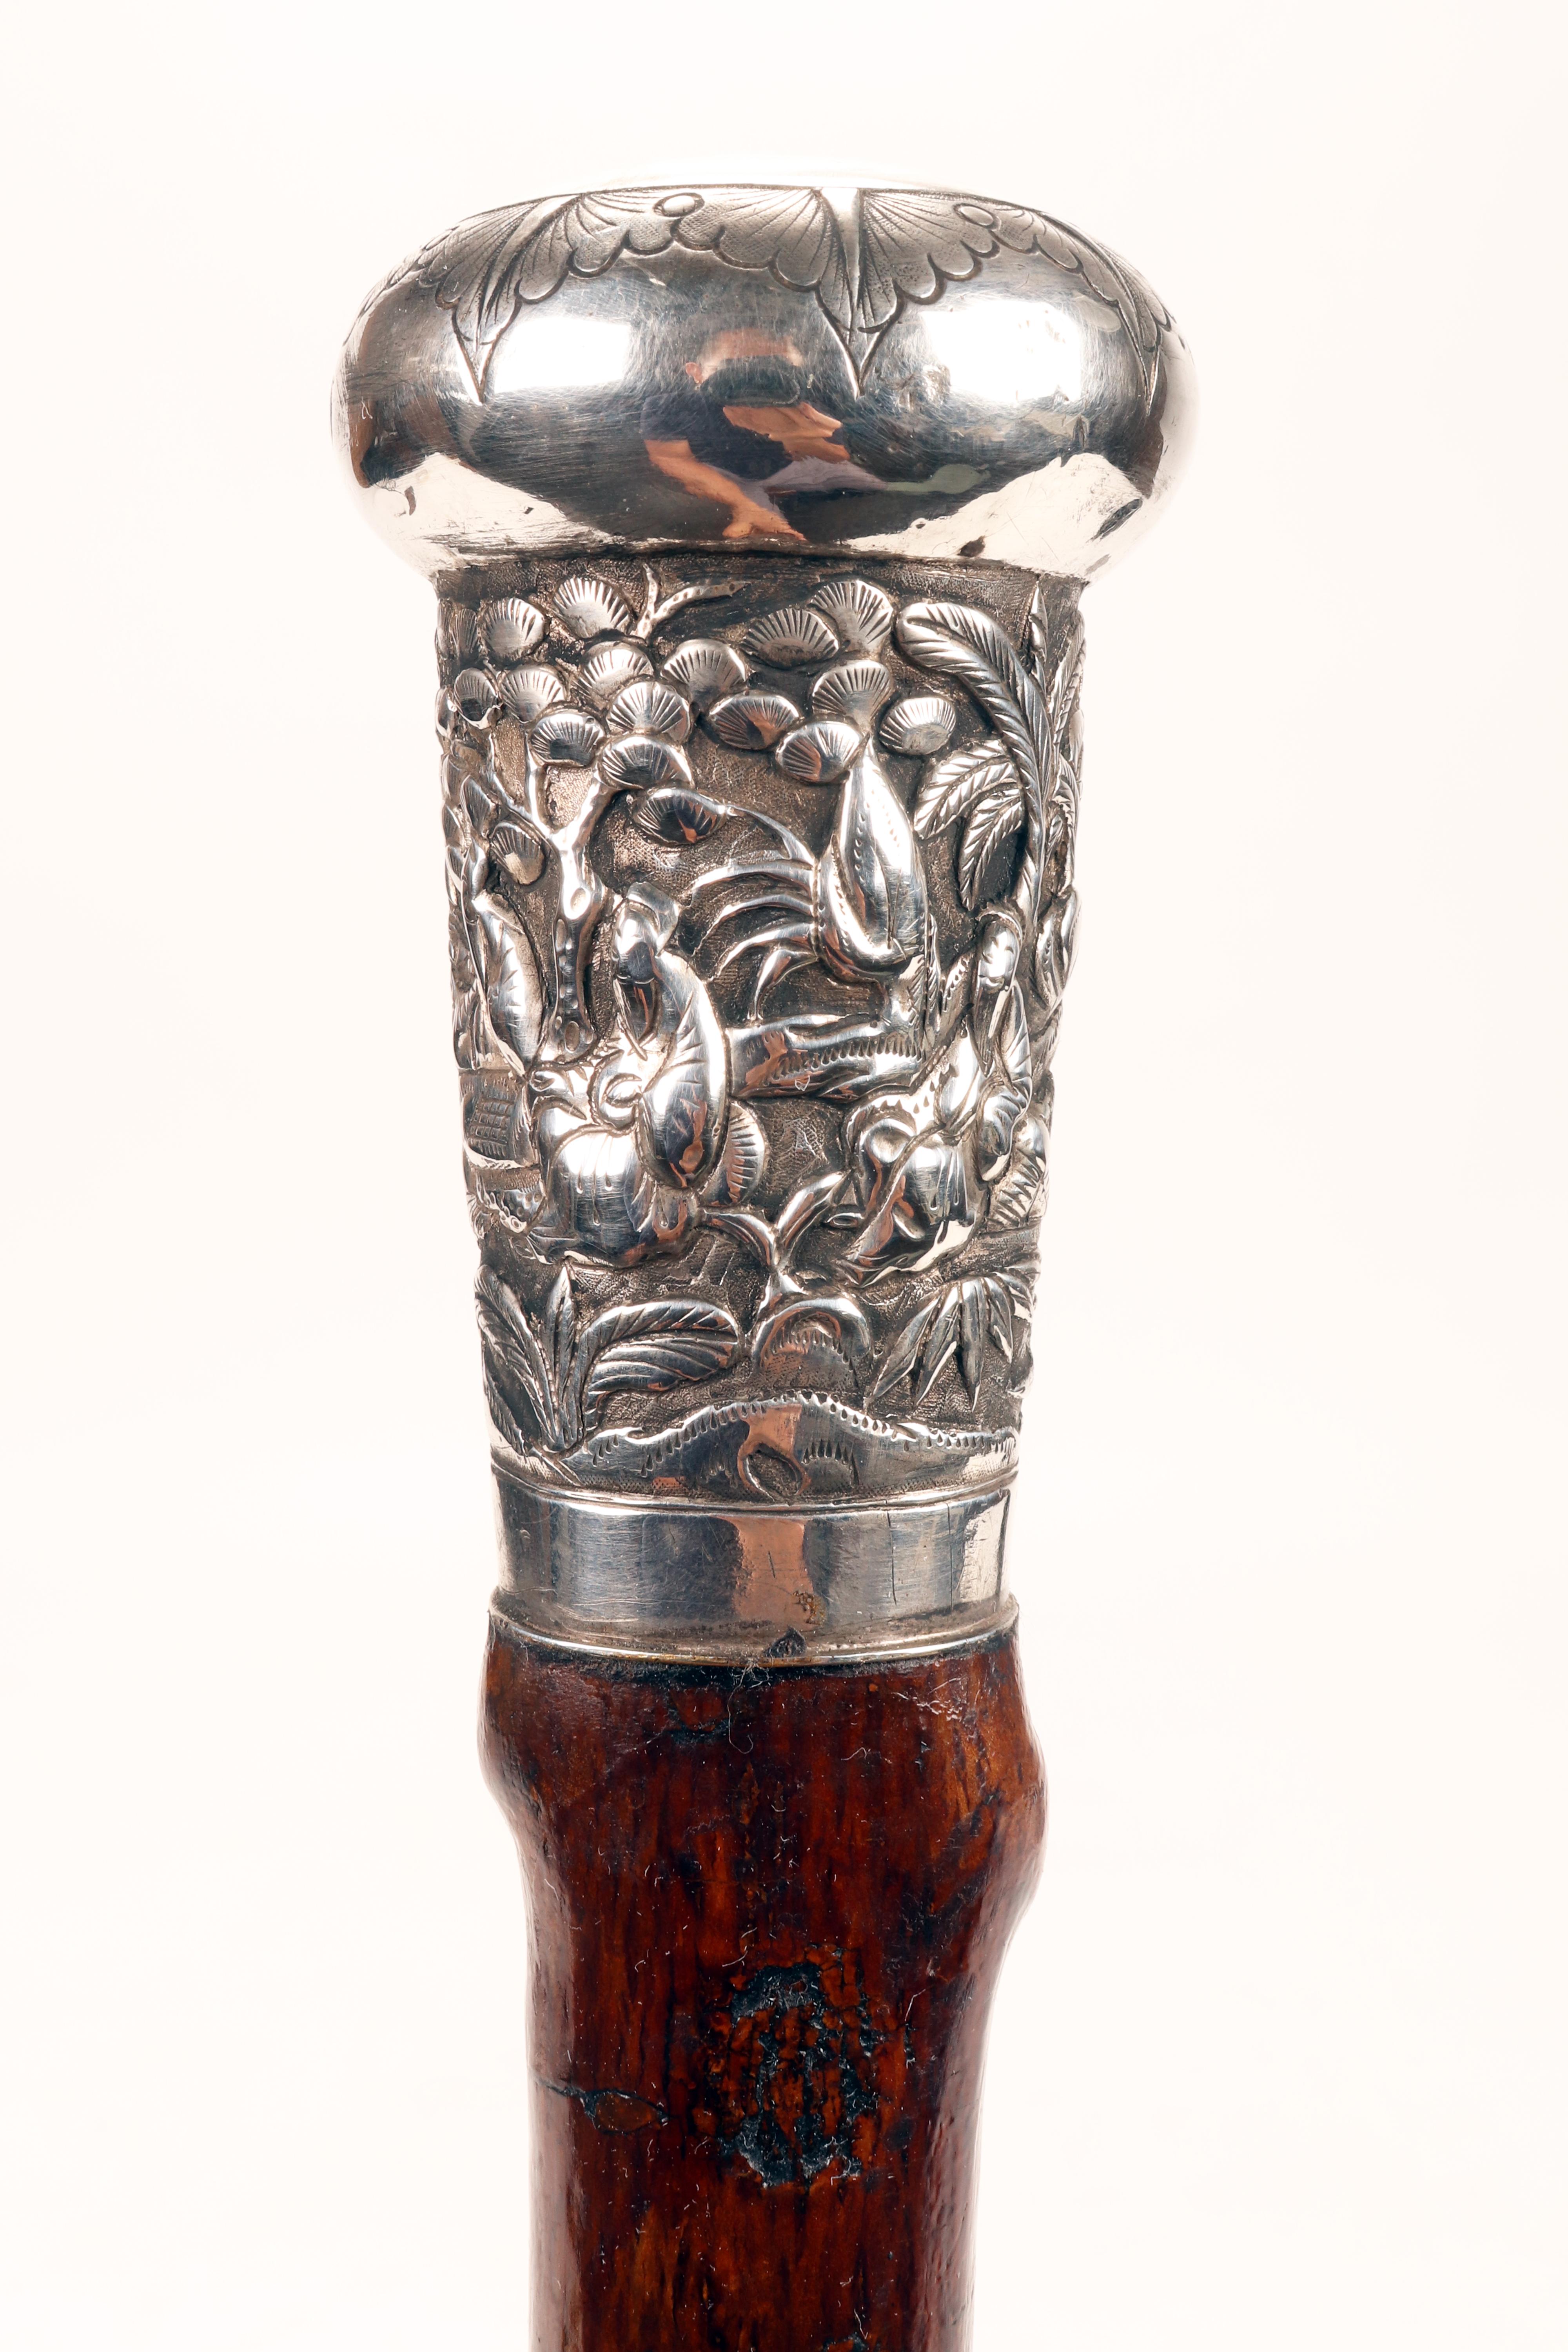 Walking stick with rustic cane in fruit wood and embellished handle. Tip and barrel, in a single solution show the shoots of the cut plant in progression along the development. The barrel is waxed. The handle, in silver, is a milord at the top of